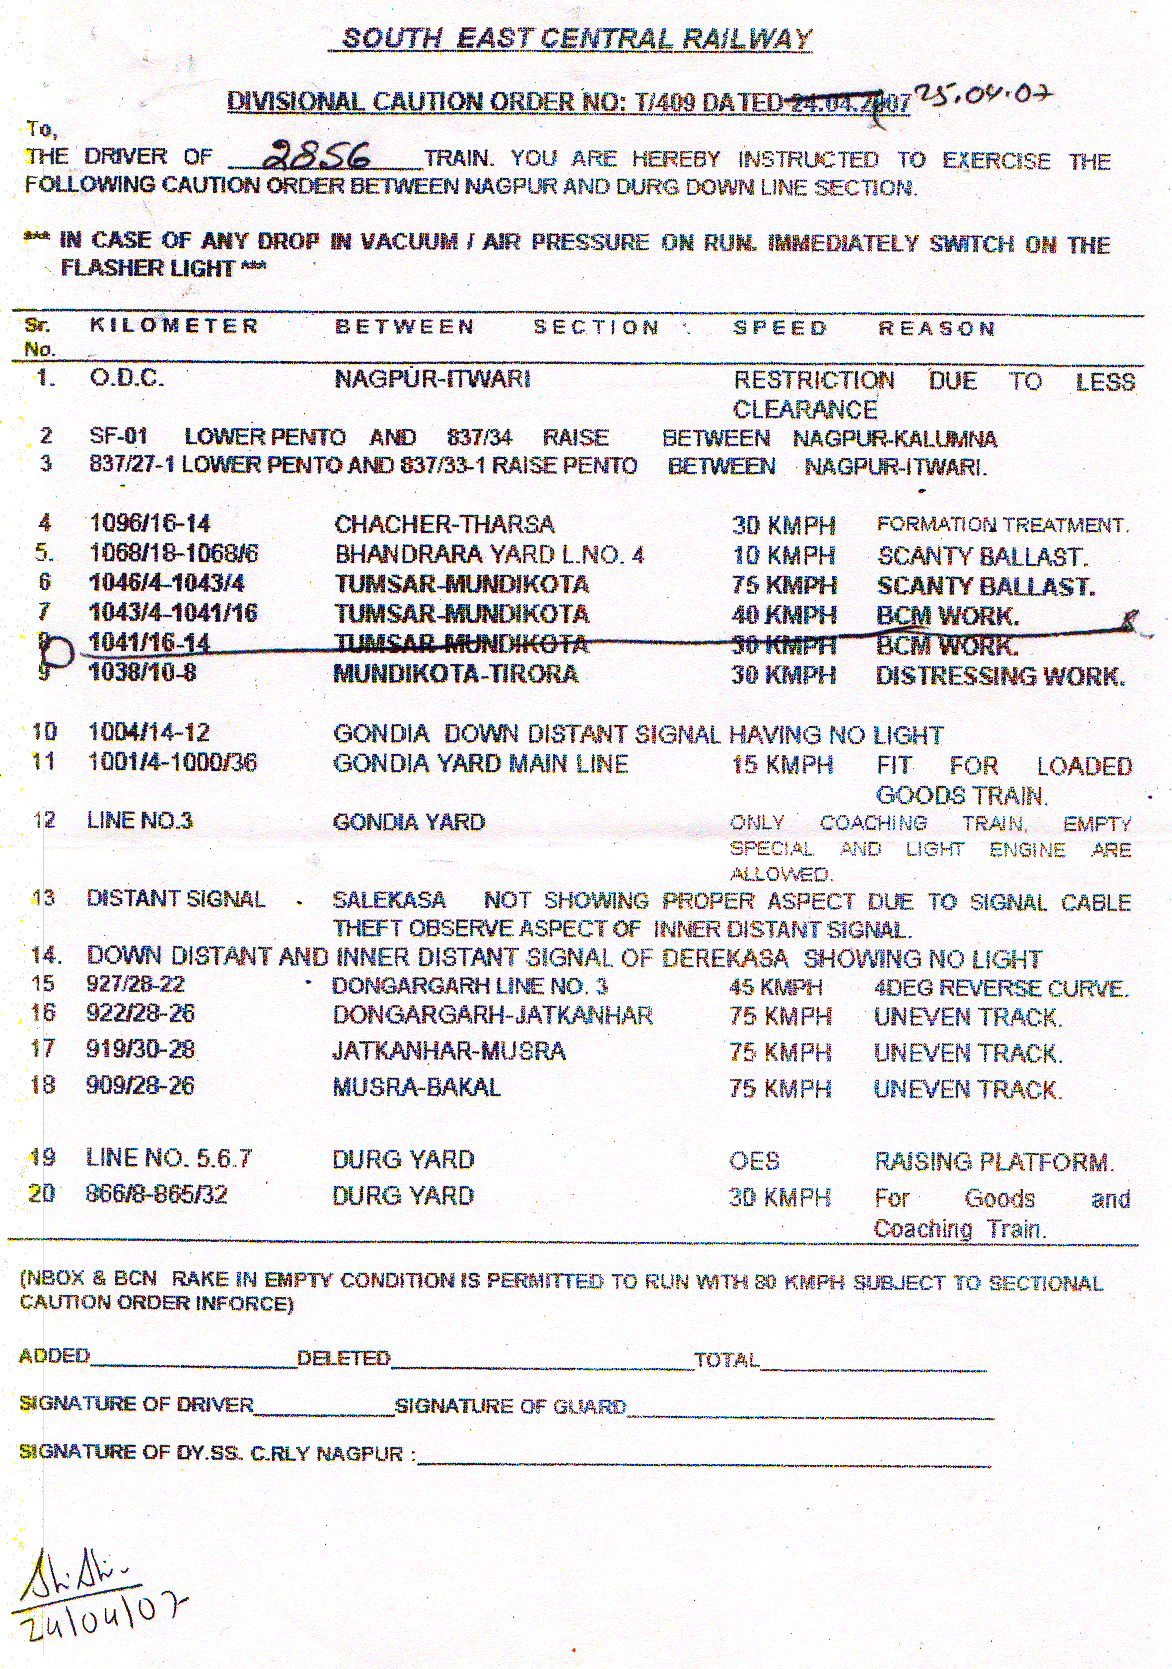 A sample caution order from Nagpur division